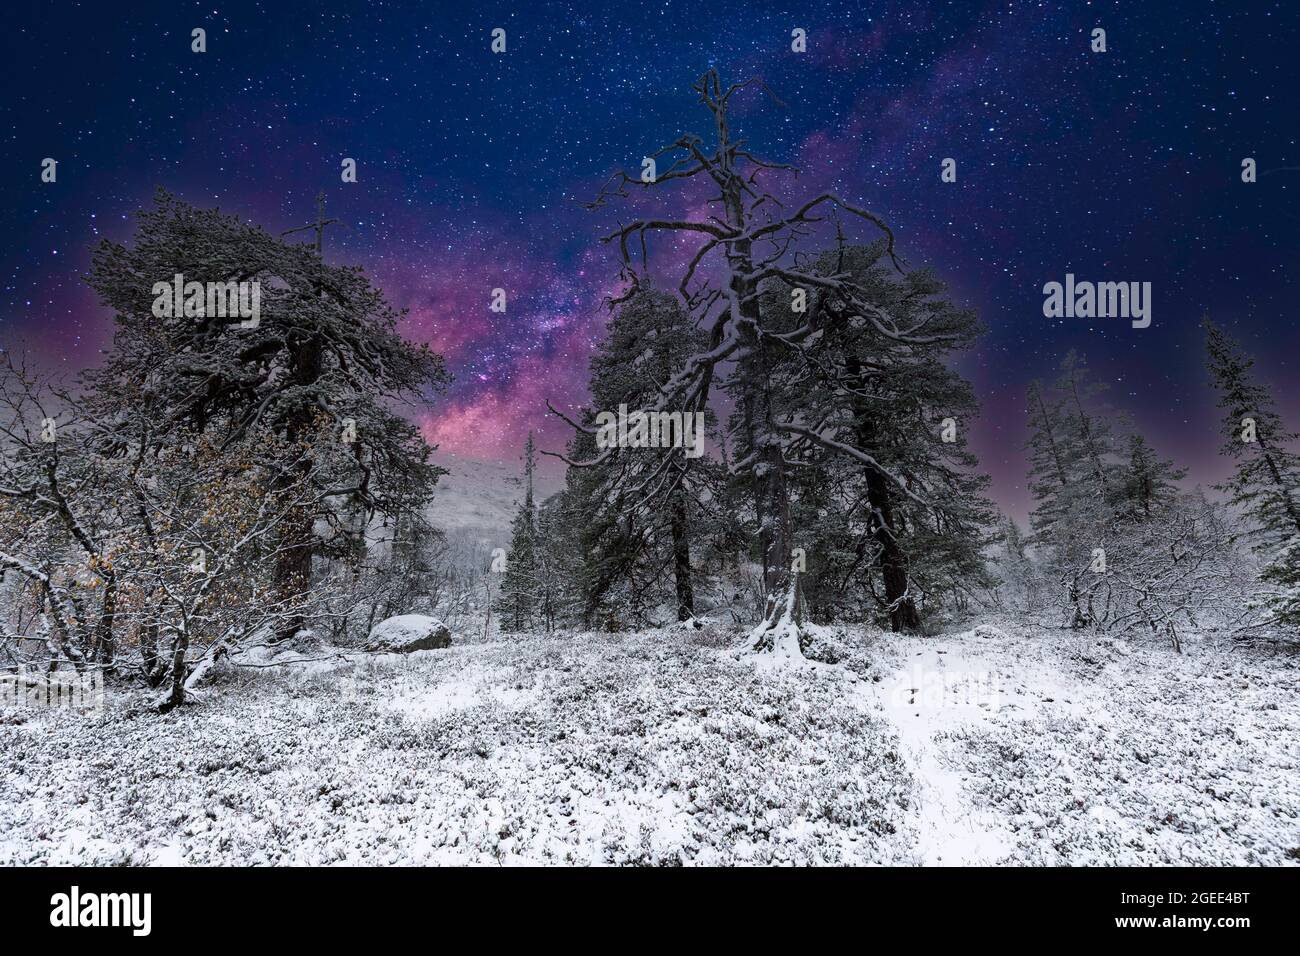 Composition of snowy Swedish mountain landscape at night with mature Norway spruce in silhouette against a background of a clear starry sky Stock Photo